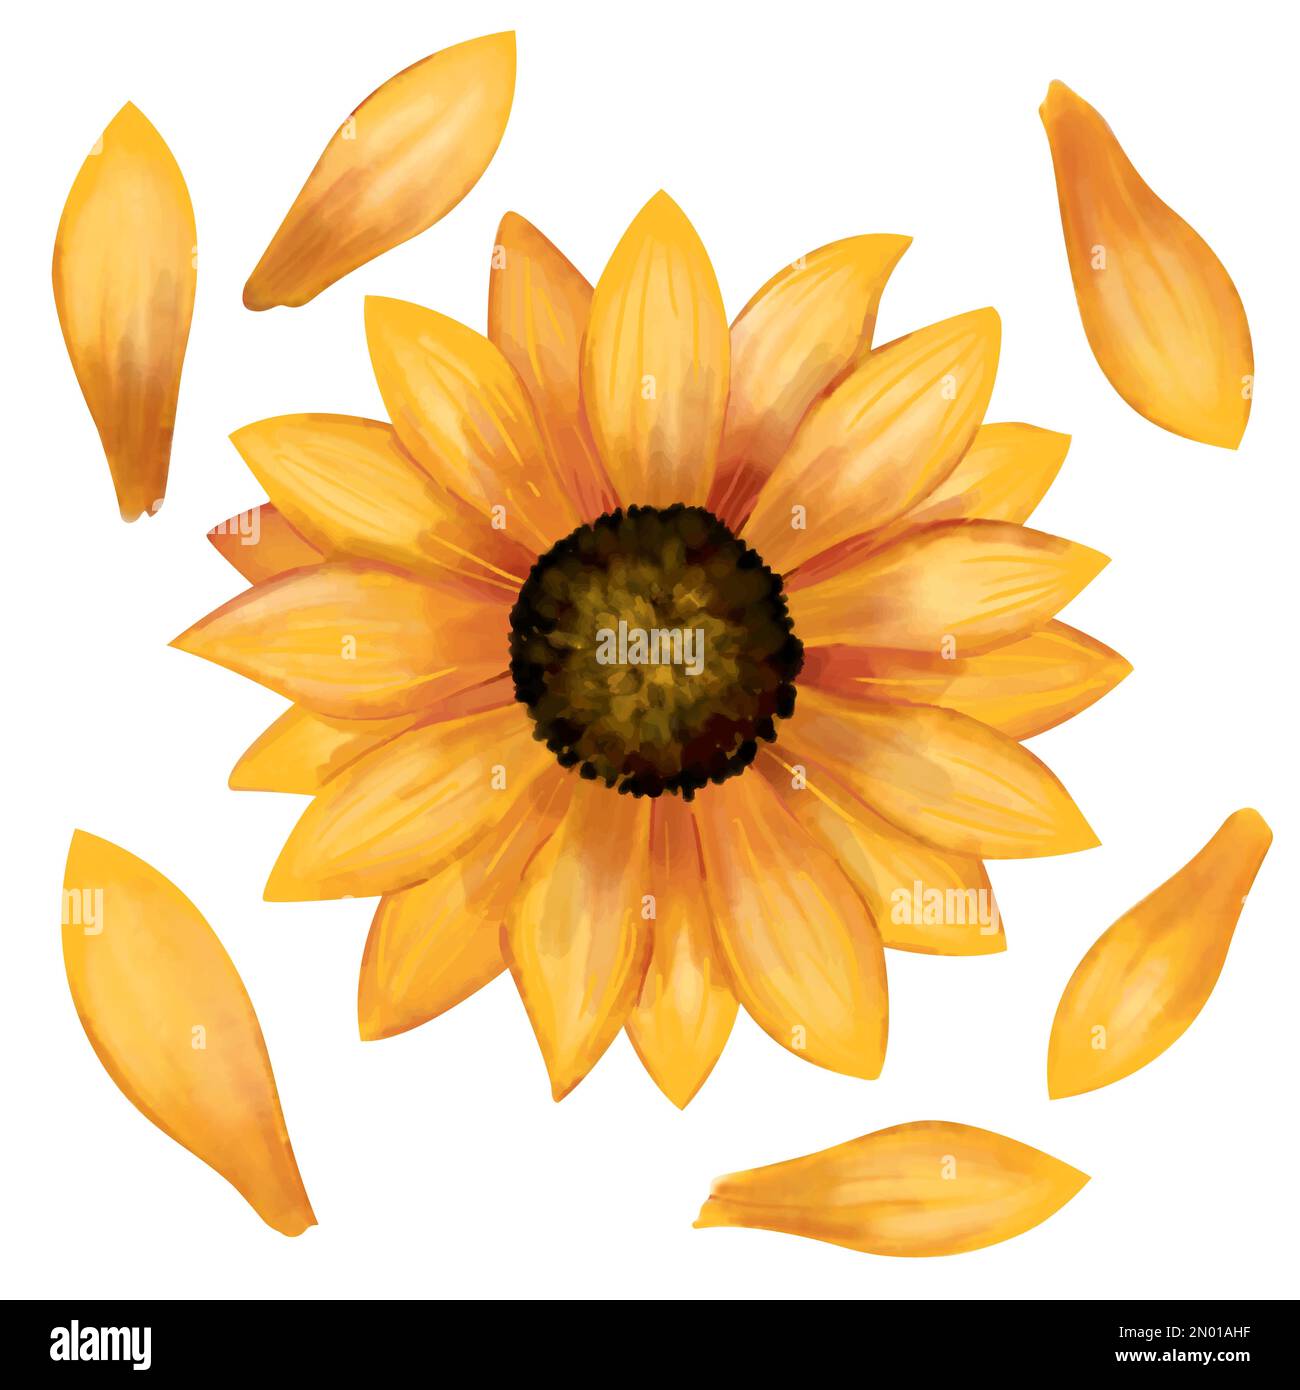 Sunflower watercolor set. Botanical decorative elements collection of sunflower head and petals isolated on white background. Stock Vector